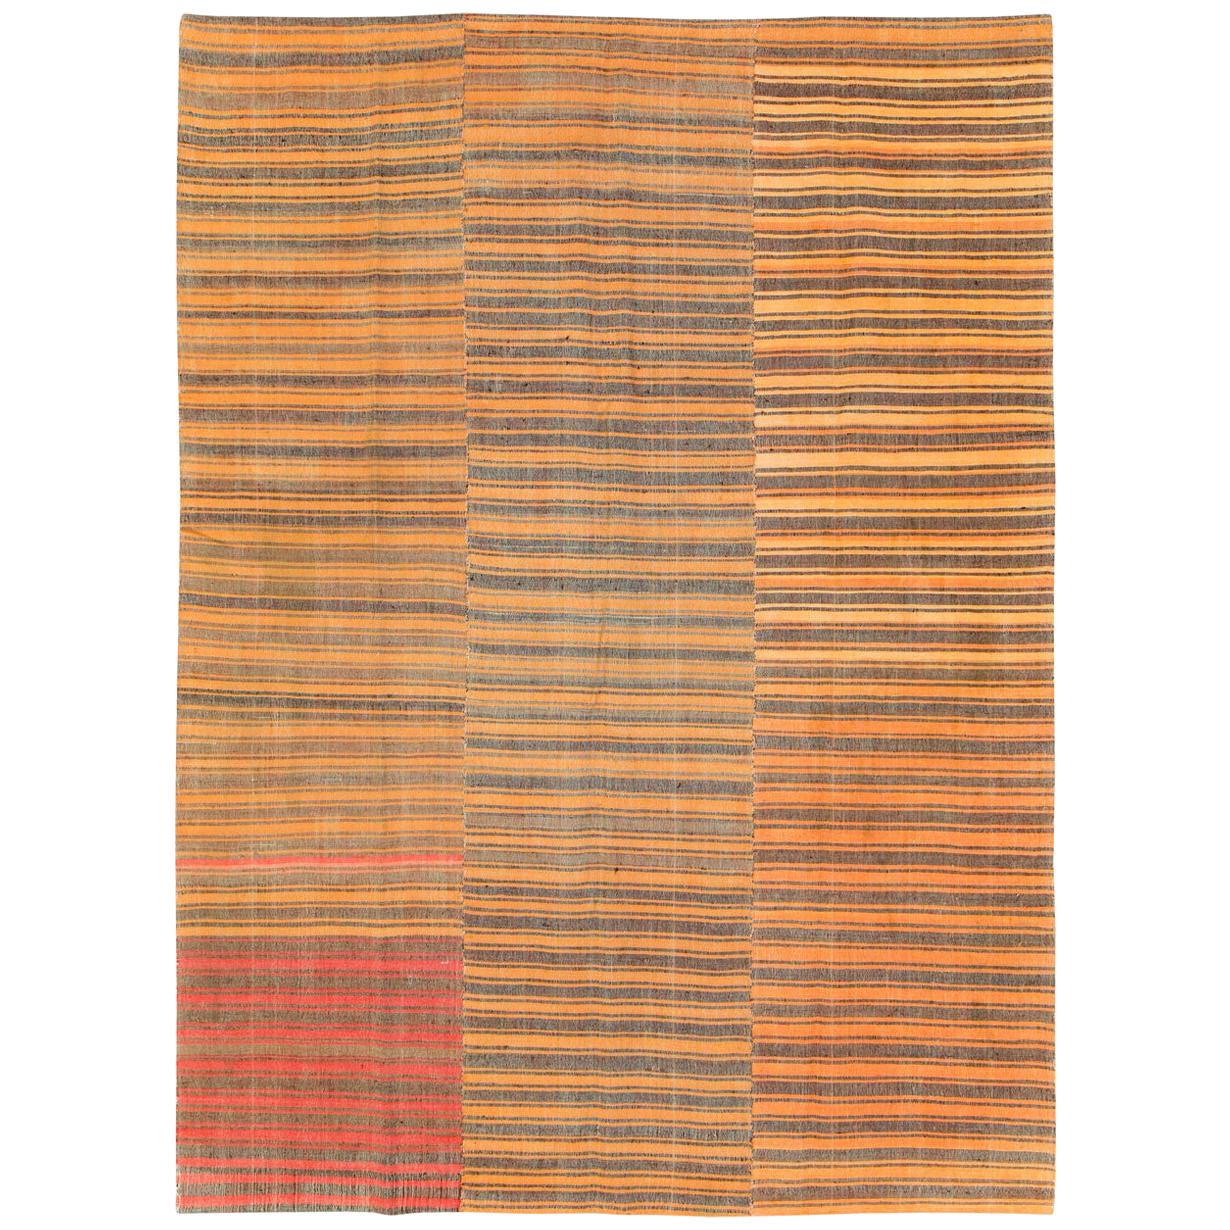 Mid-20th Century Small Room Size Turkish Flat-Weave Kilim Accent Rug in Orange